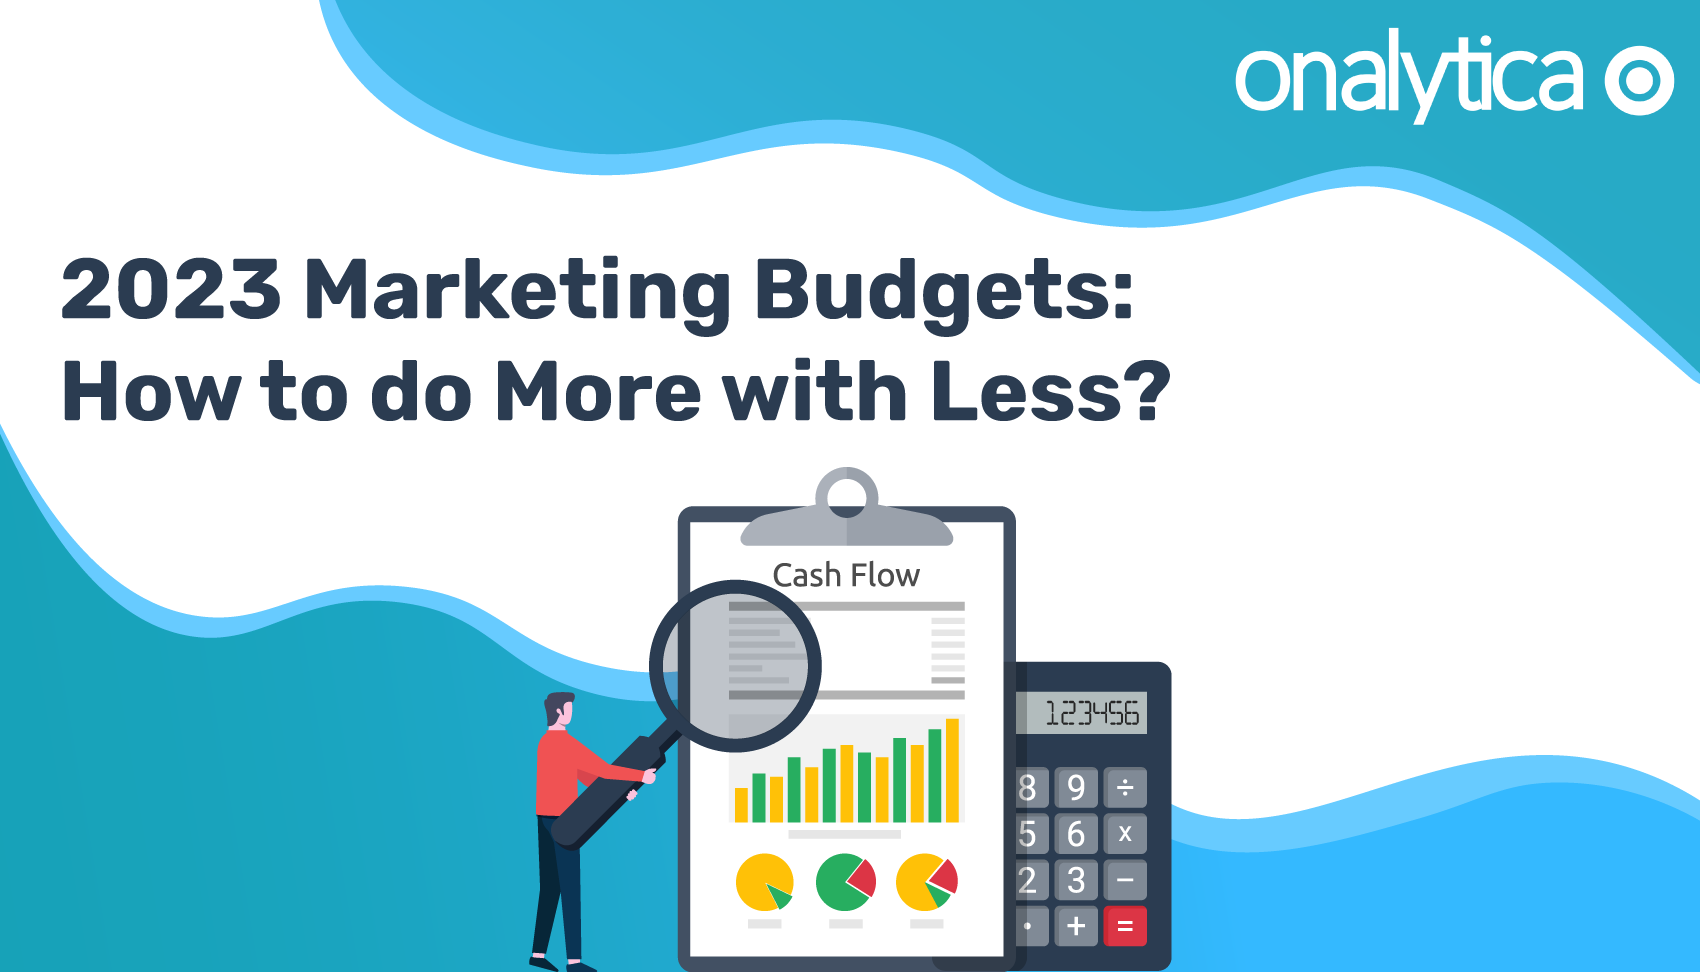 2023 Marketing Budgets: How to do More with Less?